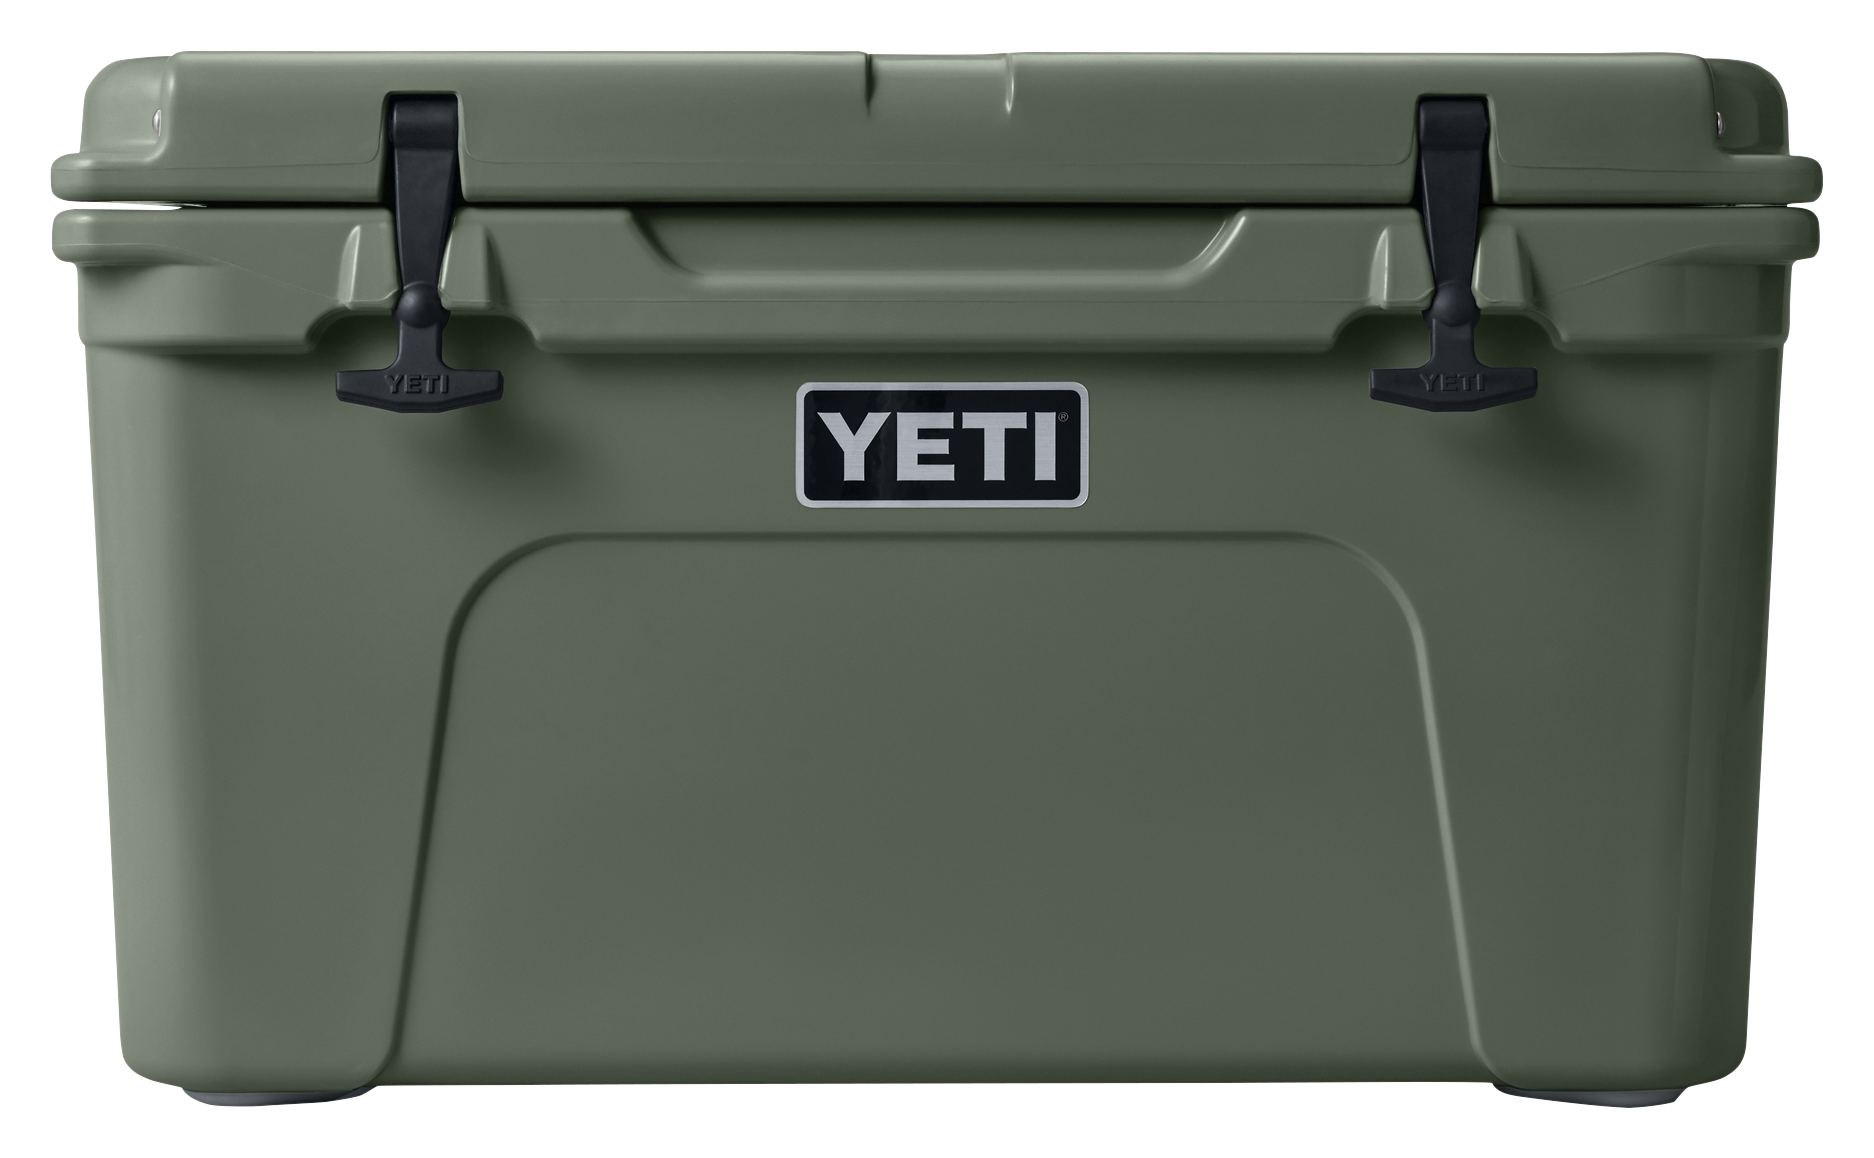 YETI Tundra 110 Cooler LIKE NEW for Sale in Bakersfield, CA